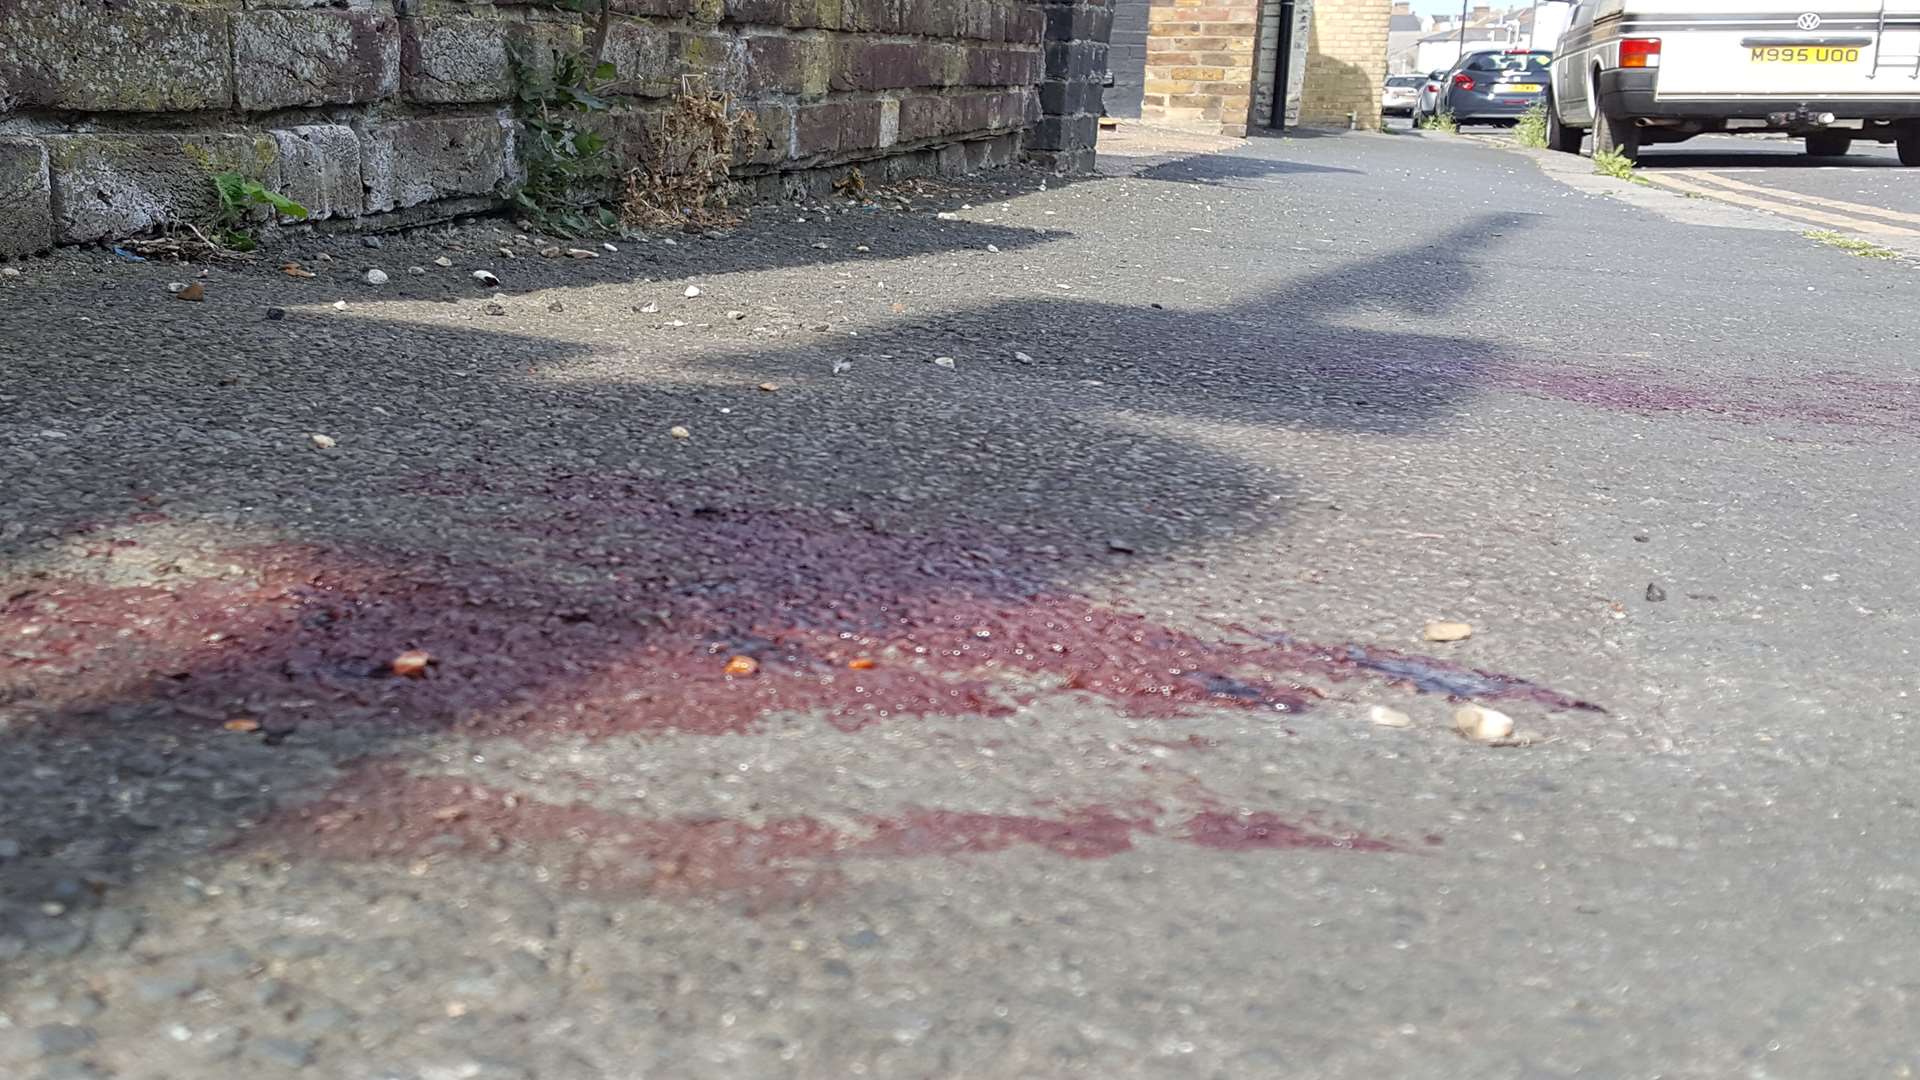 A pool of blood on the pavement in Charles Street